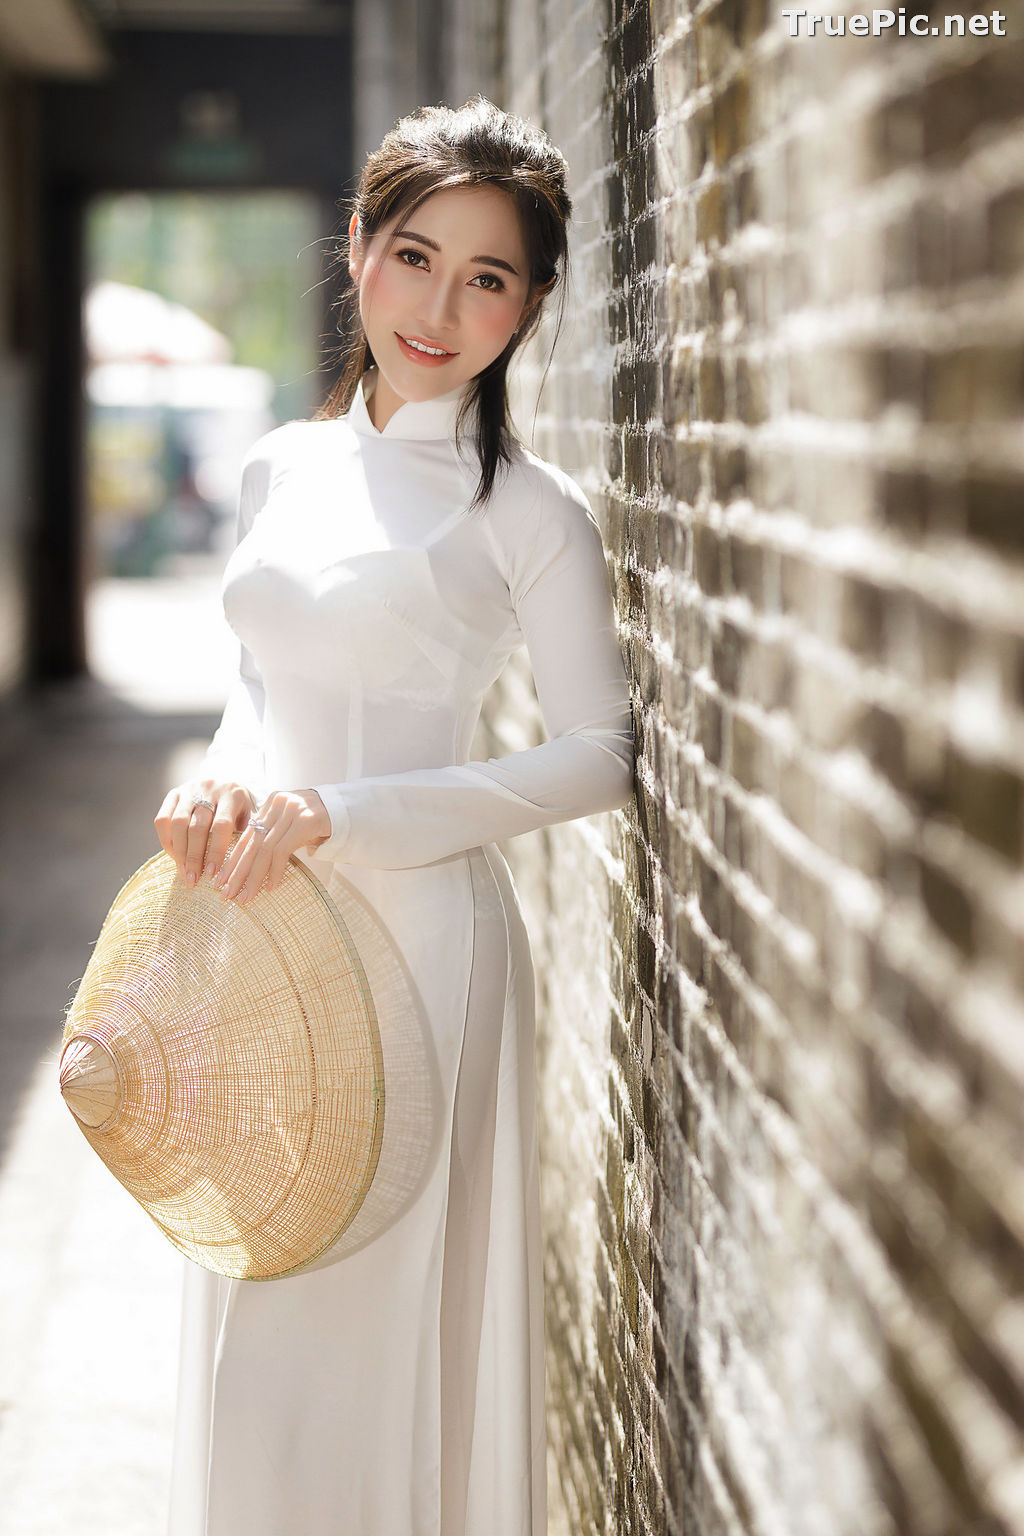 Image The Beauty of Vietnamese Girls with Traditional Dress (Ao Dai) #2 - TruePic.net - Picture-86